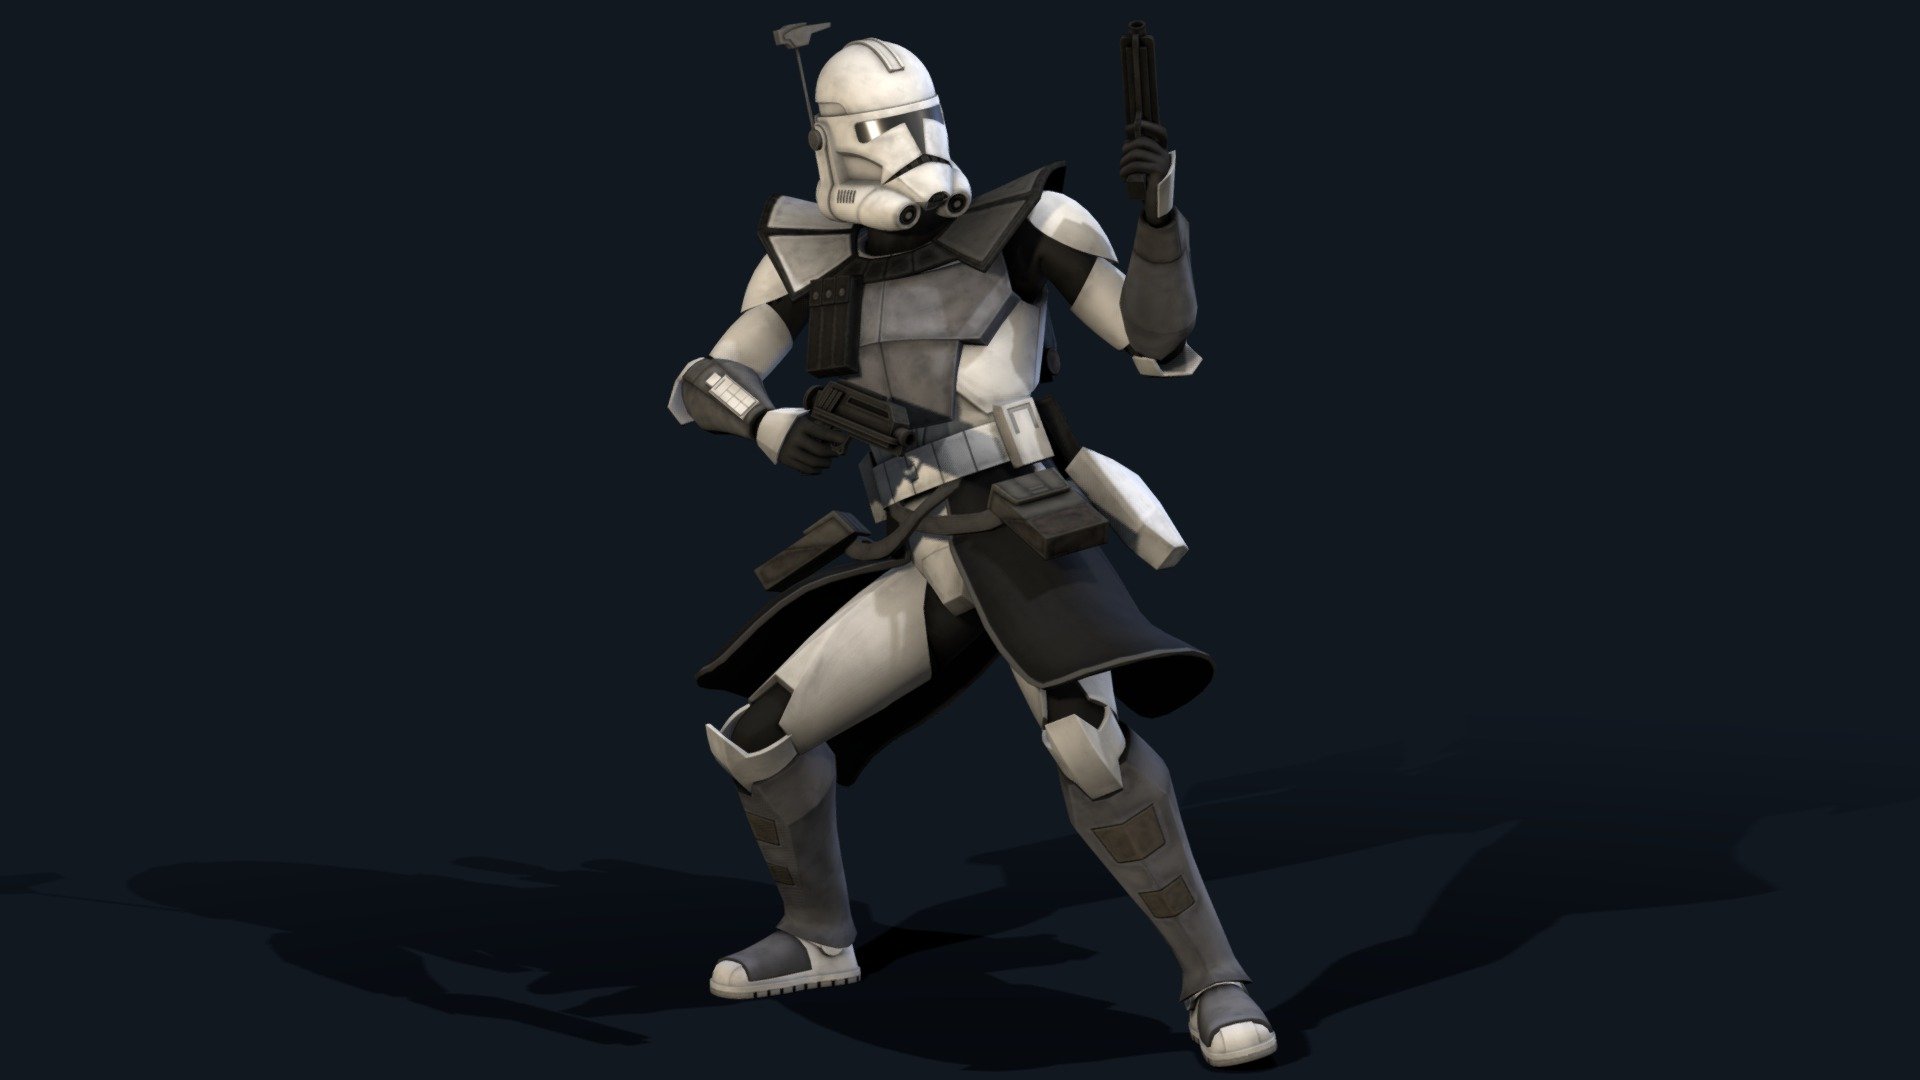 Showcase of my custom clone armor base made in the style of The Clone Wars show - Clone ARC Trooper - 3D model by Goldermor 3d model